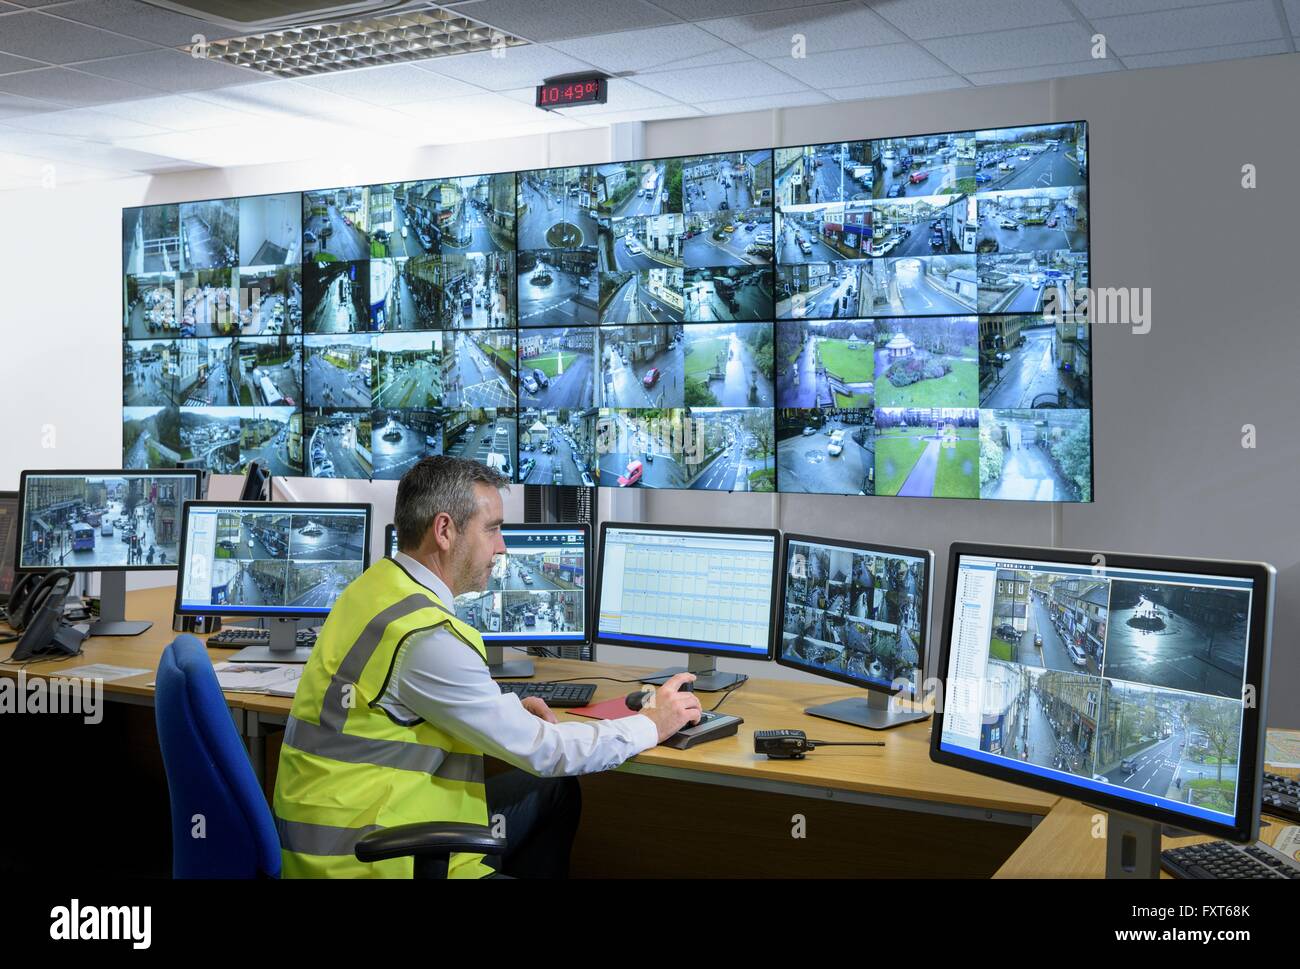 Security guard in security control room with video wall Stock Photo